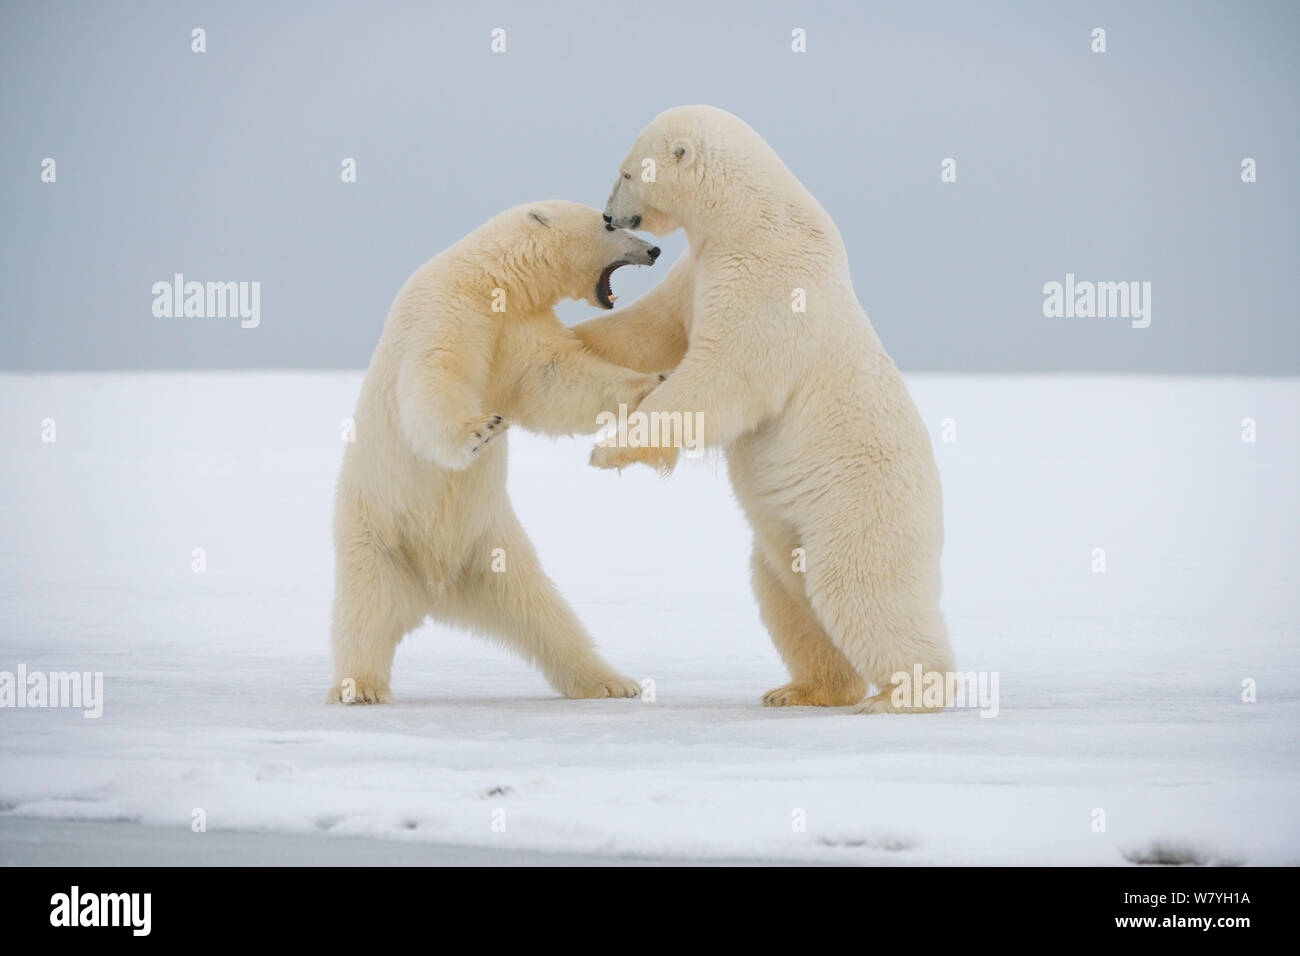 Polar bear (Ursus maritimus) two young adults play fighting on newly formed pack ice during autumn freeze up, Beaufort Sea, off Arctic coast, Alaska Stock Photo